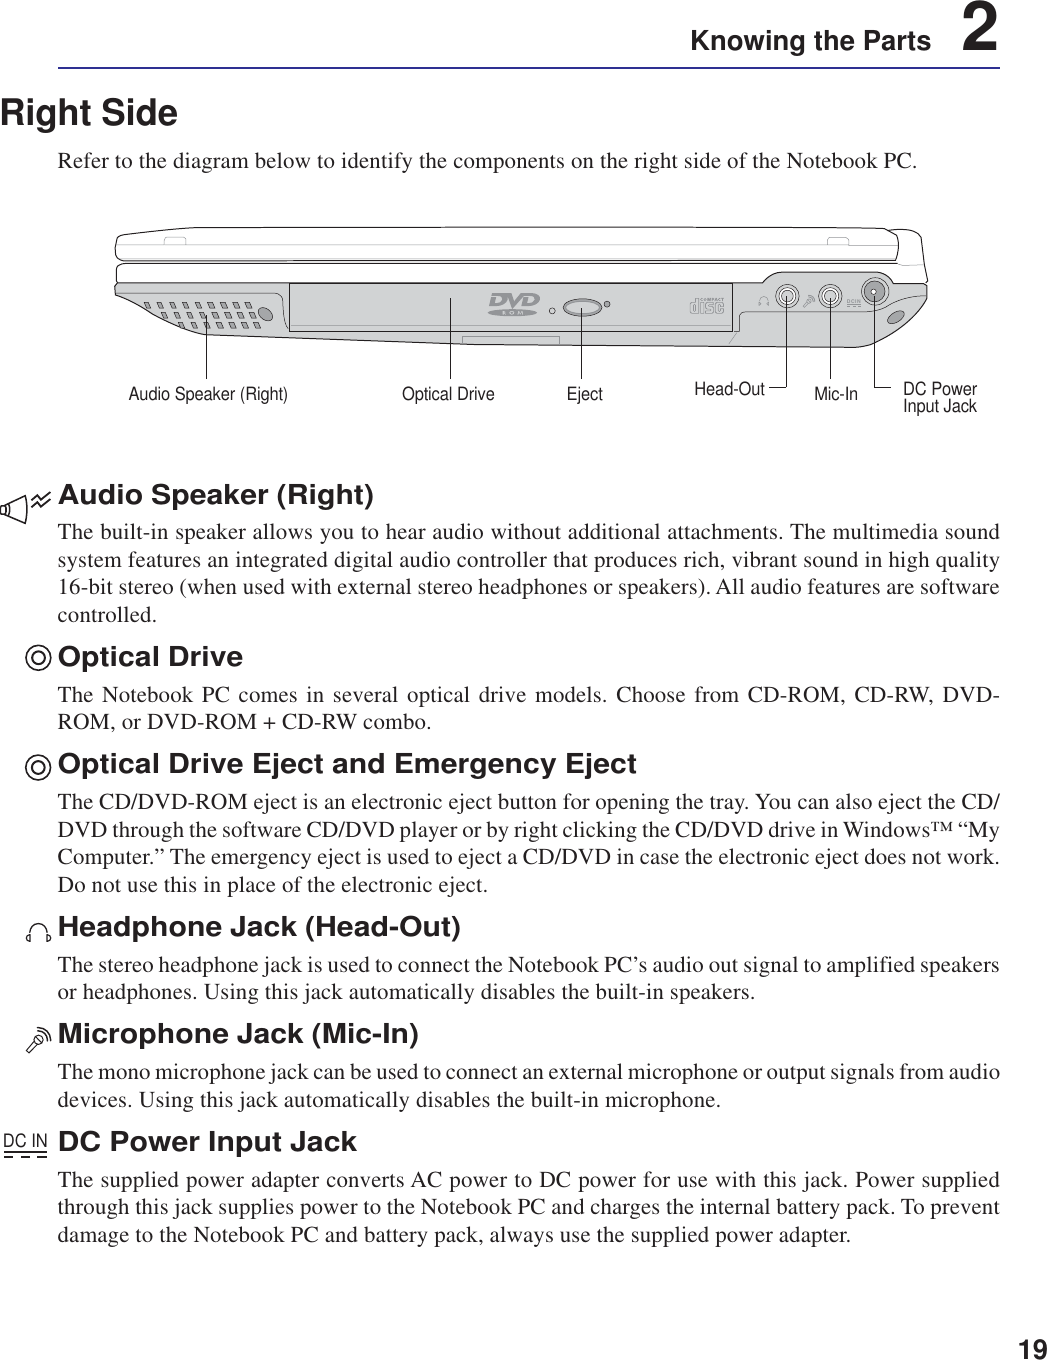 19Knowing the Parts    2Right SideRefer to the diagram below to identify the components on the right side of the Notebook PC.Audio Speaker (Right)The built-in speaker allows you to hear audio without additional attachments. The multimedia soundsystem features an integrated digital audio controller that produces rich, vibrant sound in high quality16-bit stereo (when used with external stereo headphones or speakers). All audio features are softwarecontrolled.Optical DriveThe Notebook PC comes in several optical drive models. Choose from CD-ROM, CD-RW, DVD-ROM, or DVD-ROM + CD-RW combo.Optical Drive Eject and Emergency EjectThe CD/DVD-ROM eject is an electronic eject button for opening the tray. You can also eject the CD/DVD through the software CD/DVD player or by right clicking the CD/DVD drive in Windows™ “MyComputer.” The emergency eject is used to eject a CD/DVD in case the electronic eject does not work.Do not use this in place of the electronic eject.Headphone Jack (Head-Out)The stereo headphone jack is used to connect the Notebook PC’s audio out signal to amplified speakersor headphones. Using this jack automatically disables the built-in speakers.Microphone Jack (Mic-In)The mono microphone jack can be used to connect an external microphone or output signals from audiodevices. Using this jack automatically disables the built-in microphone.DC Power Input JackThe supplied power adapter converts AC power to DC power for use with this jack. Power suppliedthrough this jack supplies power to the Notebook PC and charges the internal battery pack. To preventdamage to the Notebook PC and battery pack, always use the supplied power adapter.DC INDCINOptical Drive DC PowerInput JackAudio Speaker (Right) Mic-InHead-OutEject